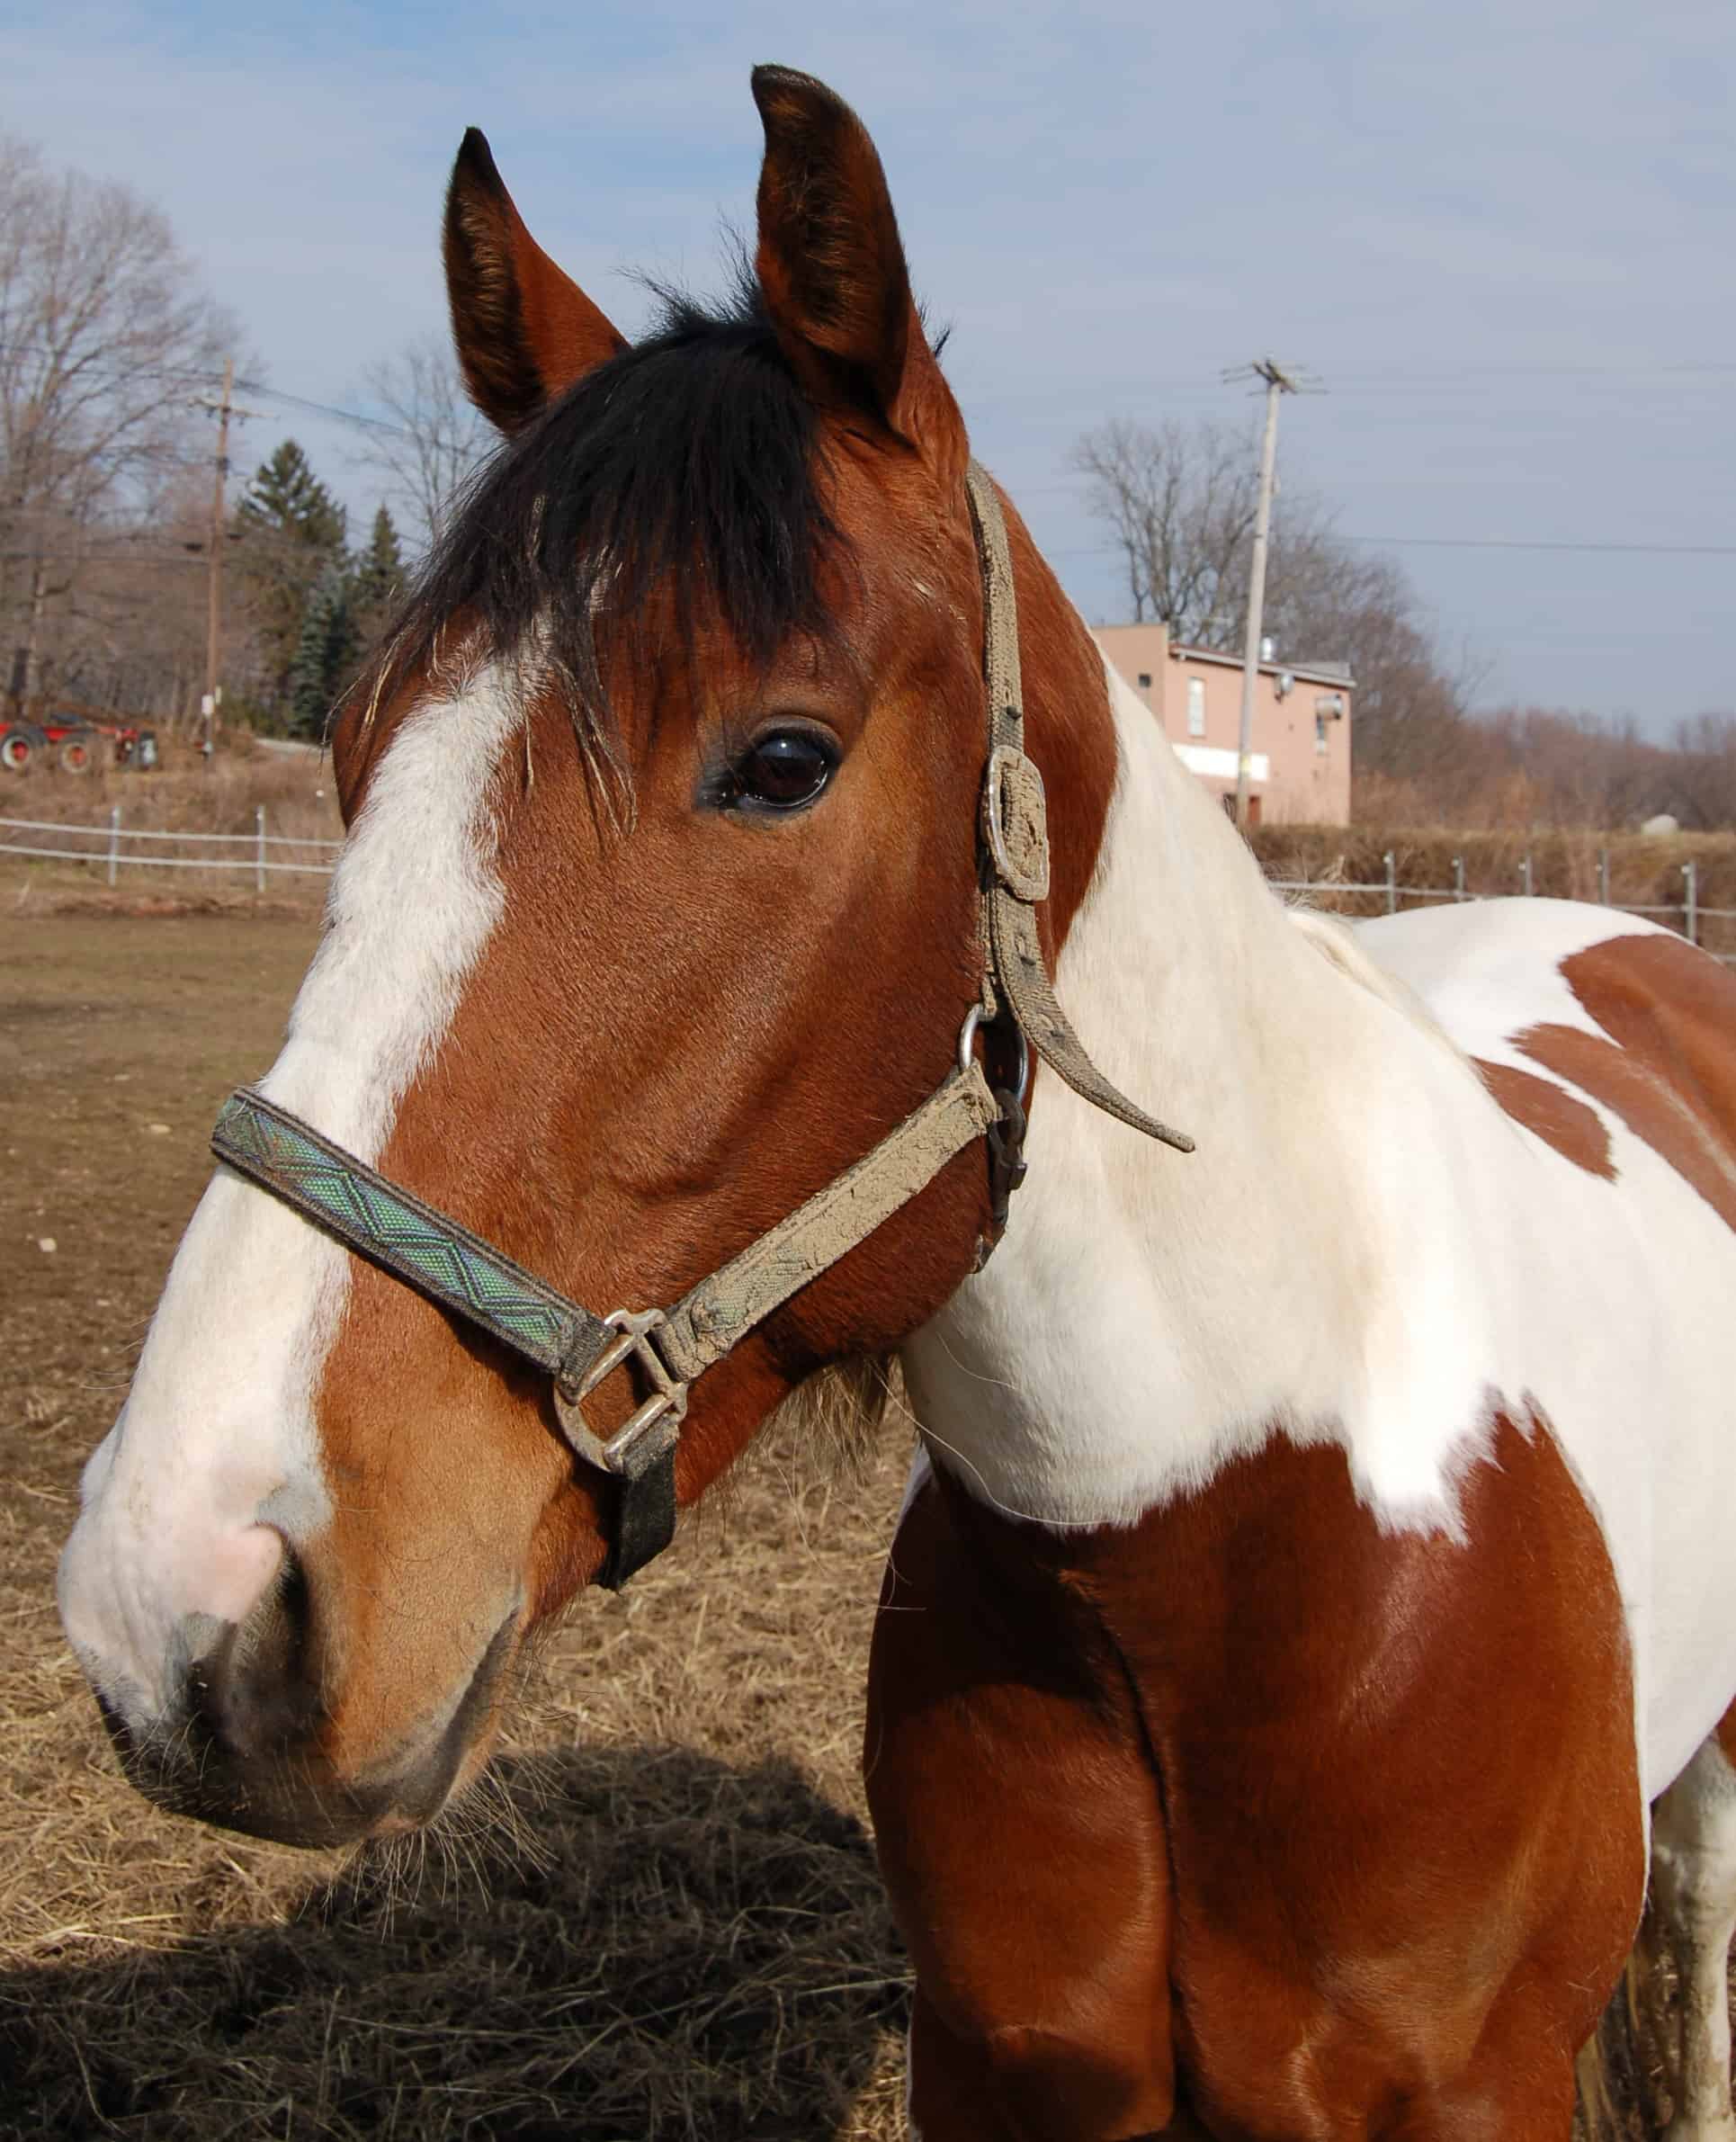 An American Paint horse in the pasture.